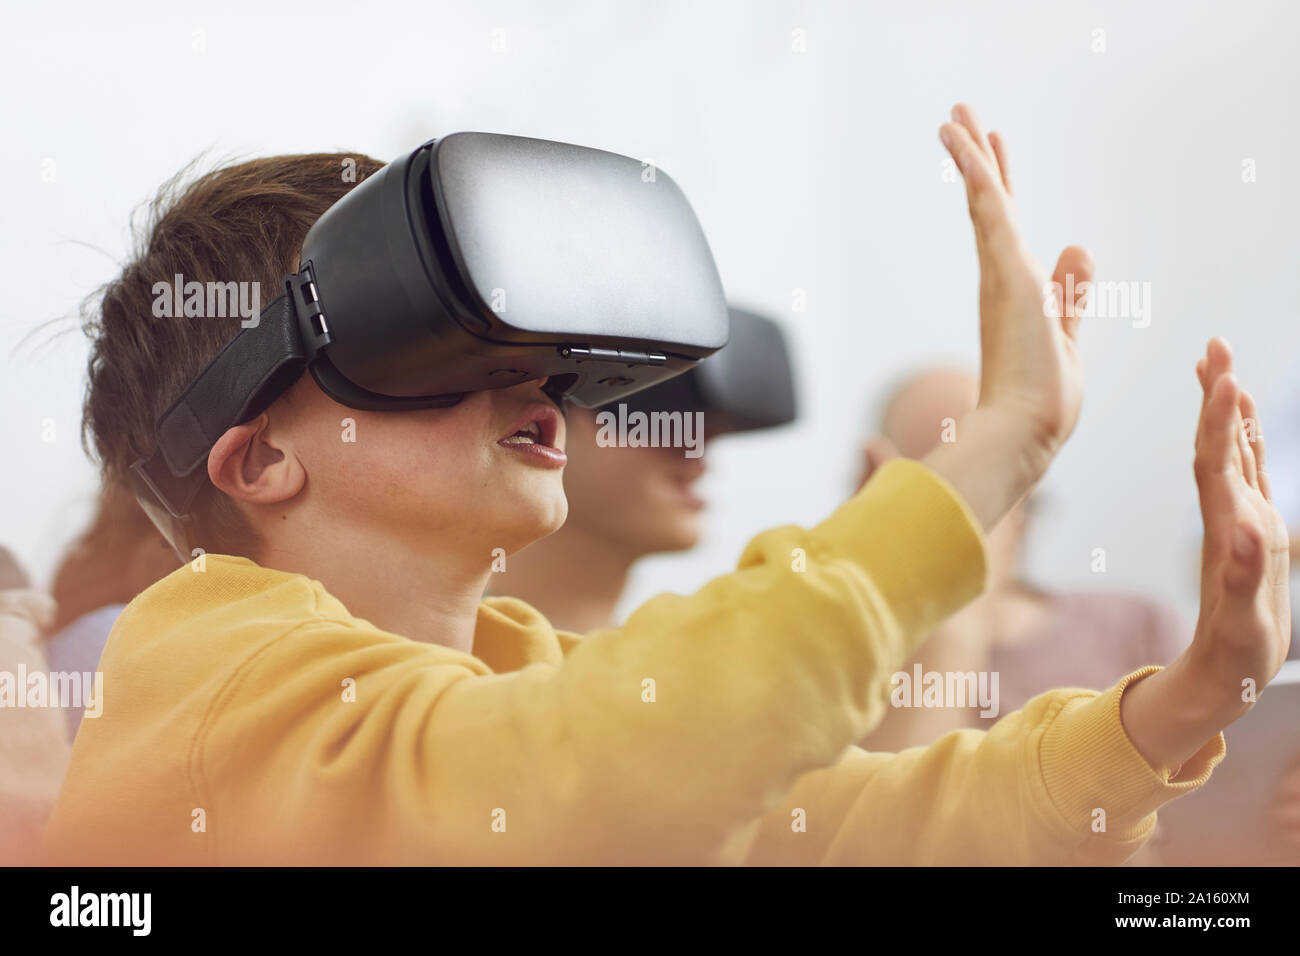 Little boy playing with VR goggles, sittiing on couch with his family Stock Photo